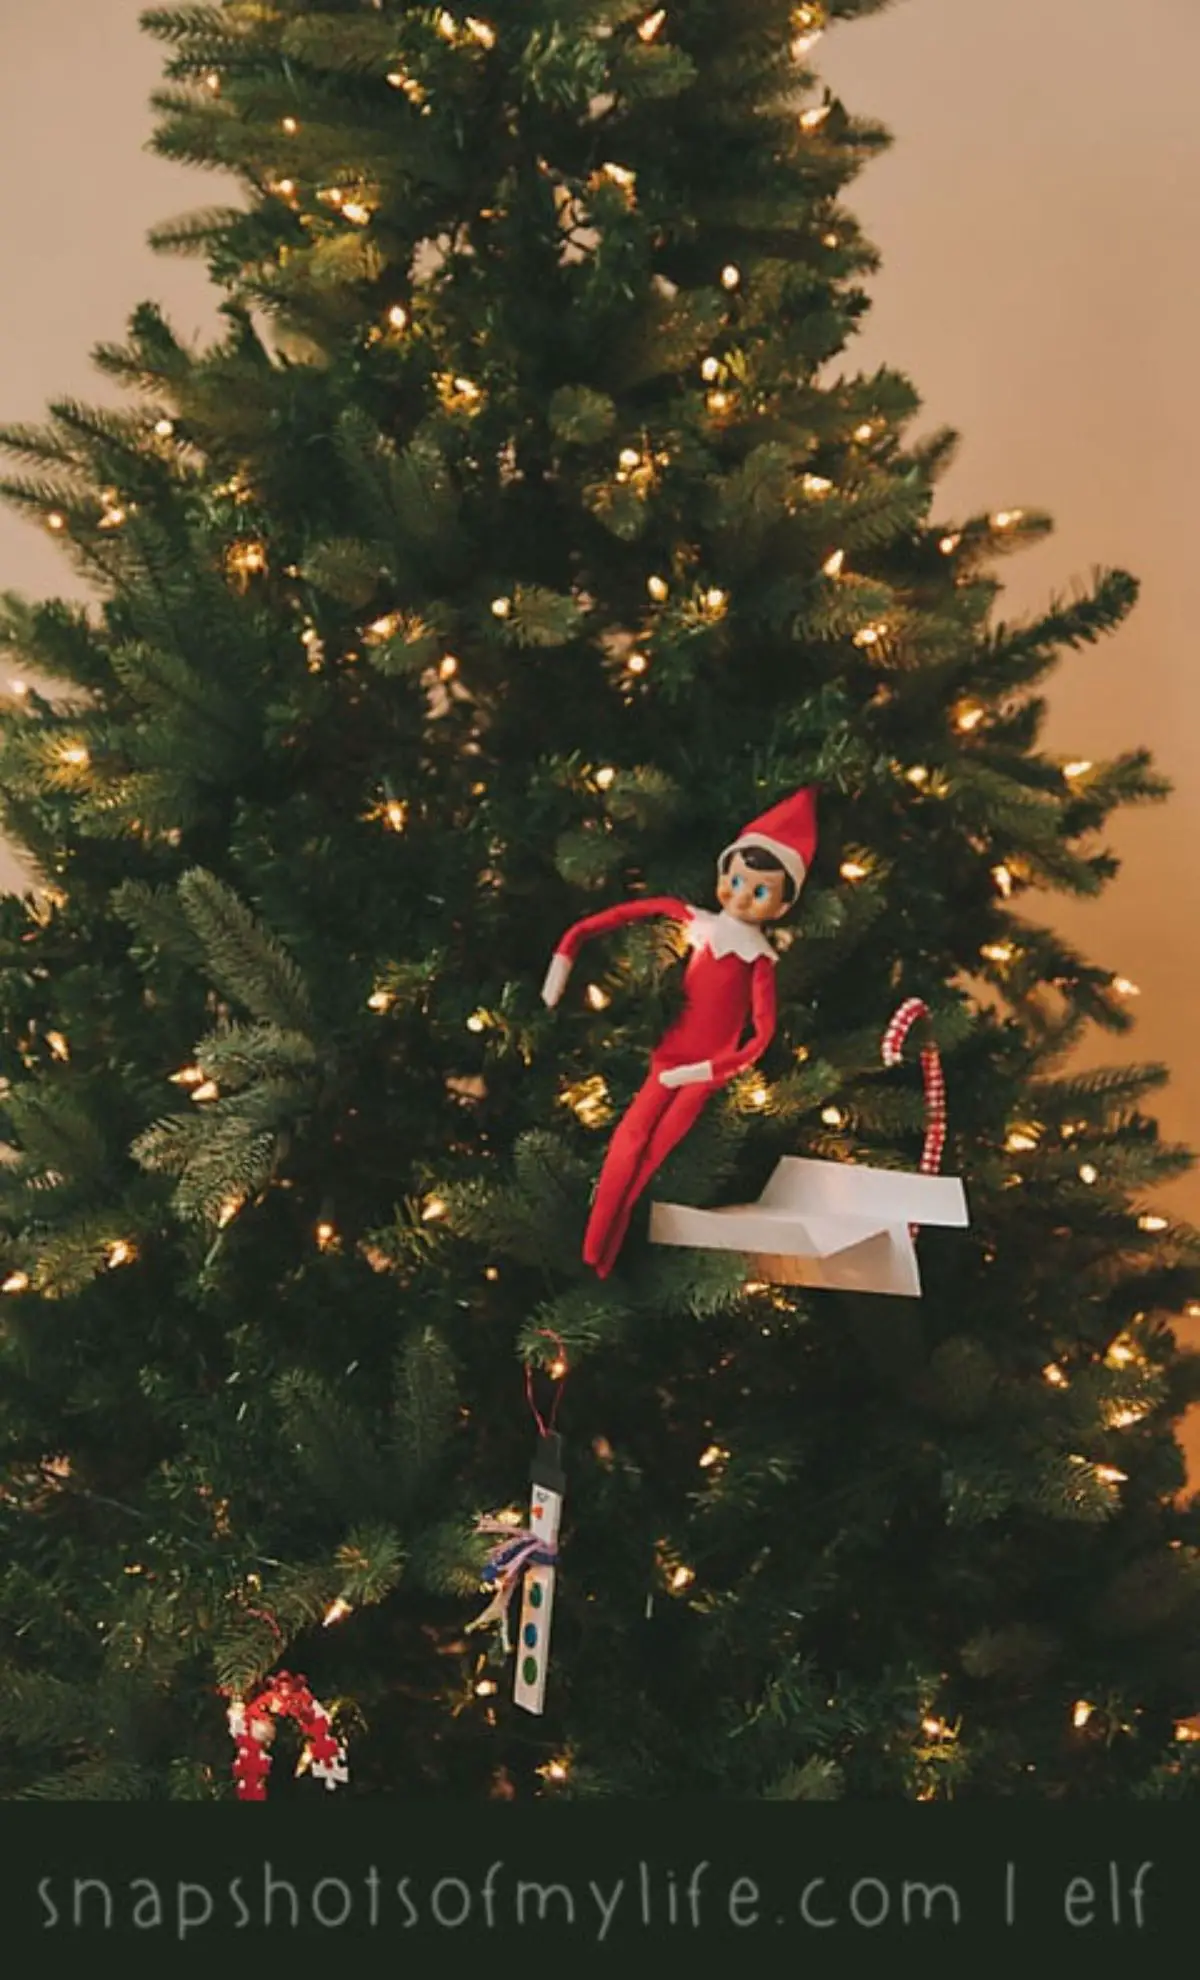 Elf in the Christmas tree